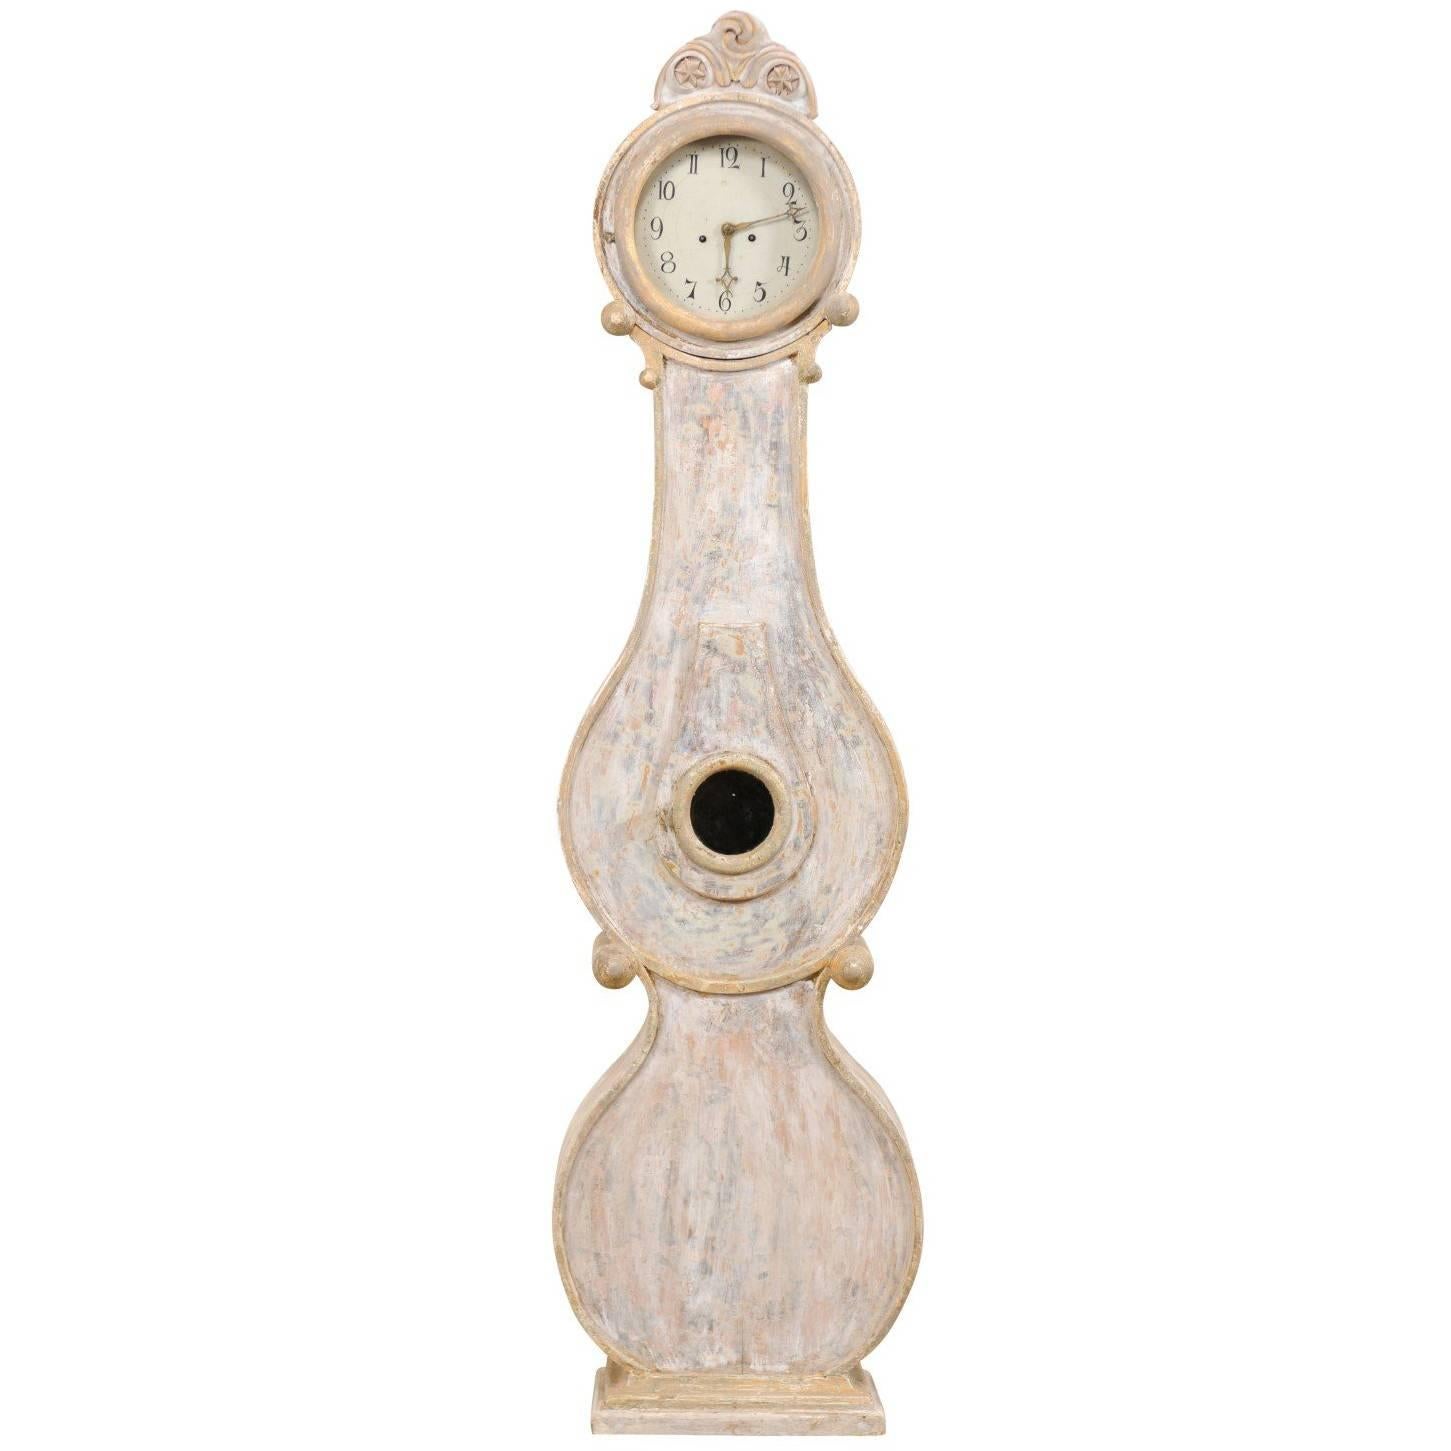 19th Century Swedish Fryksdahl Painted Wood Floor Clock with Scroll Accents